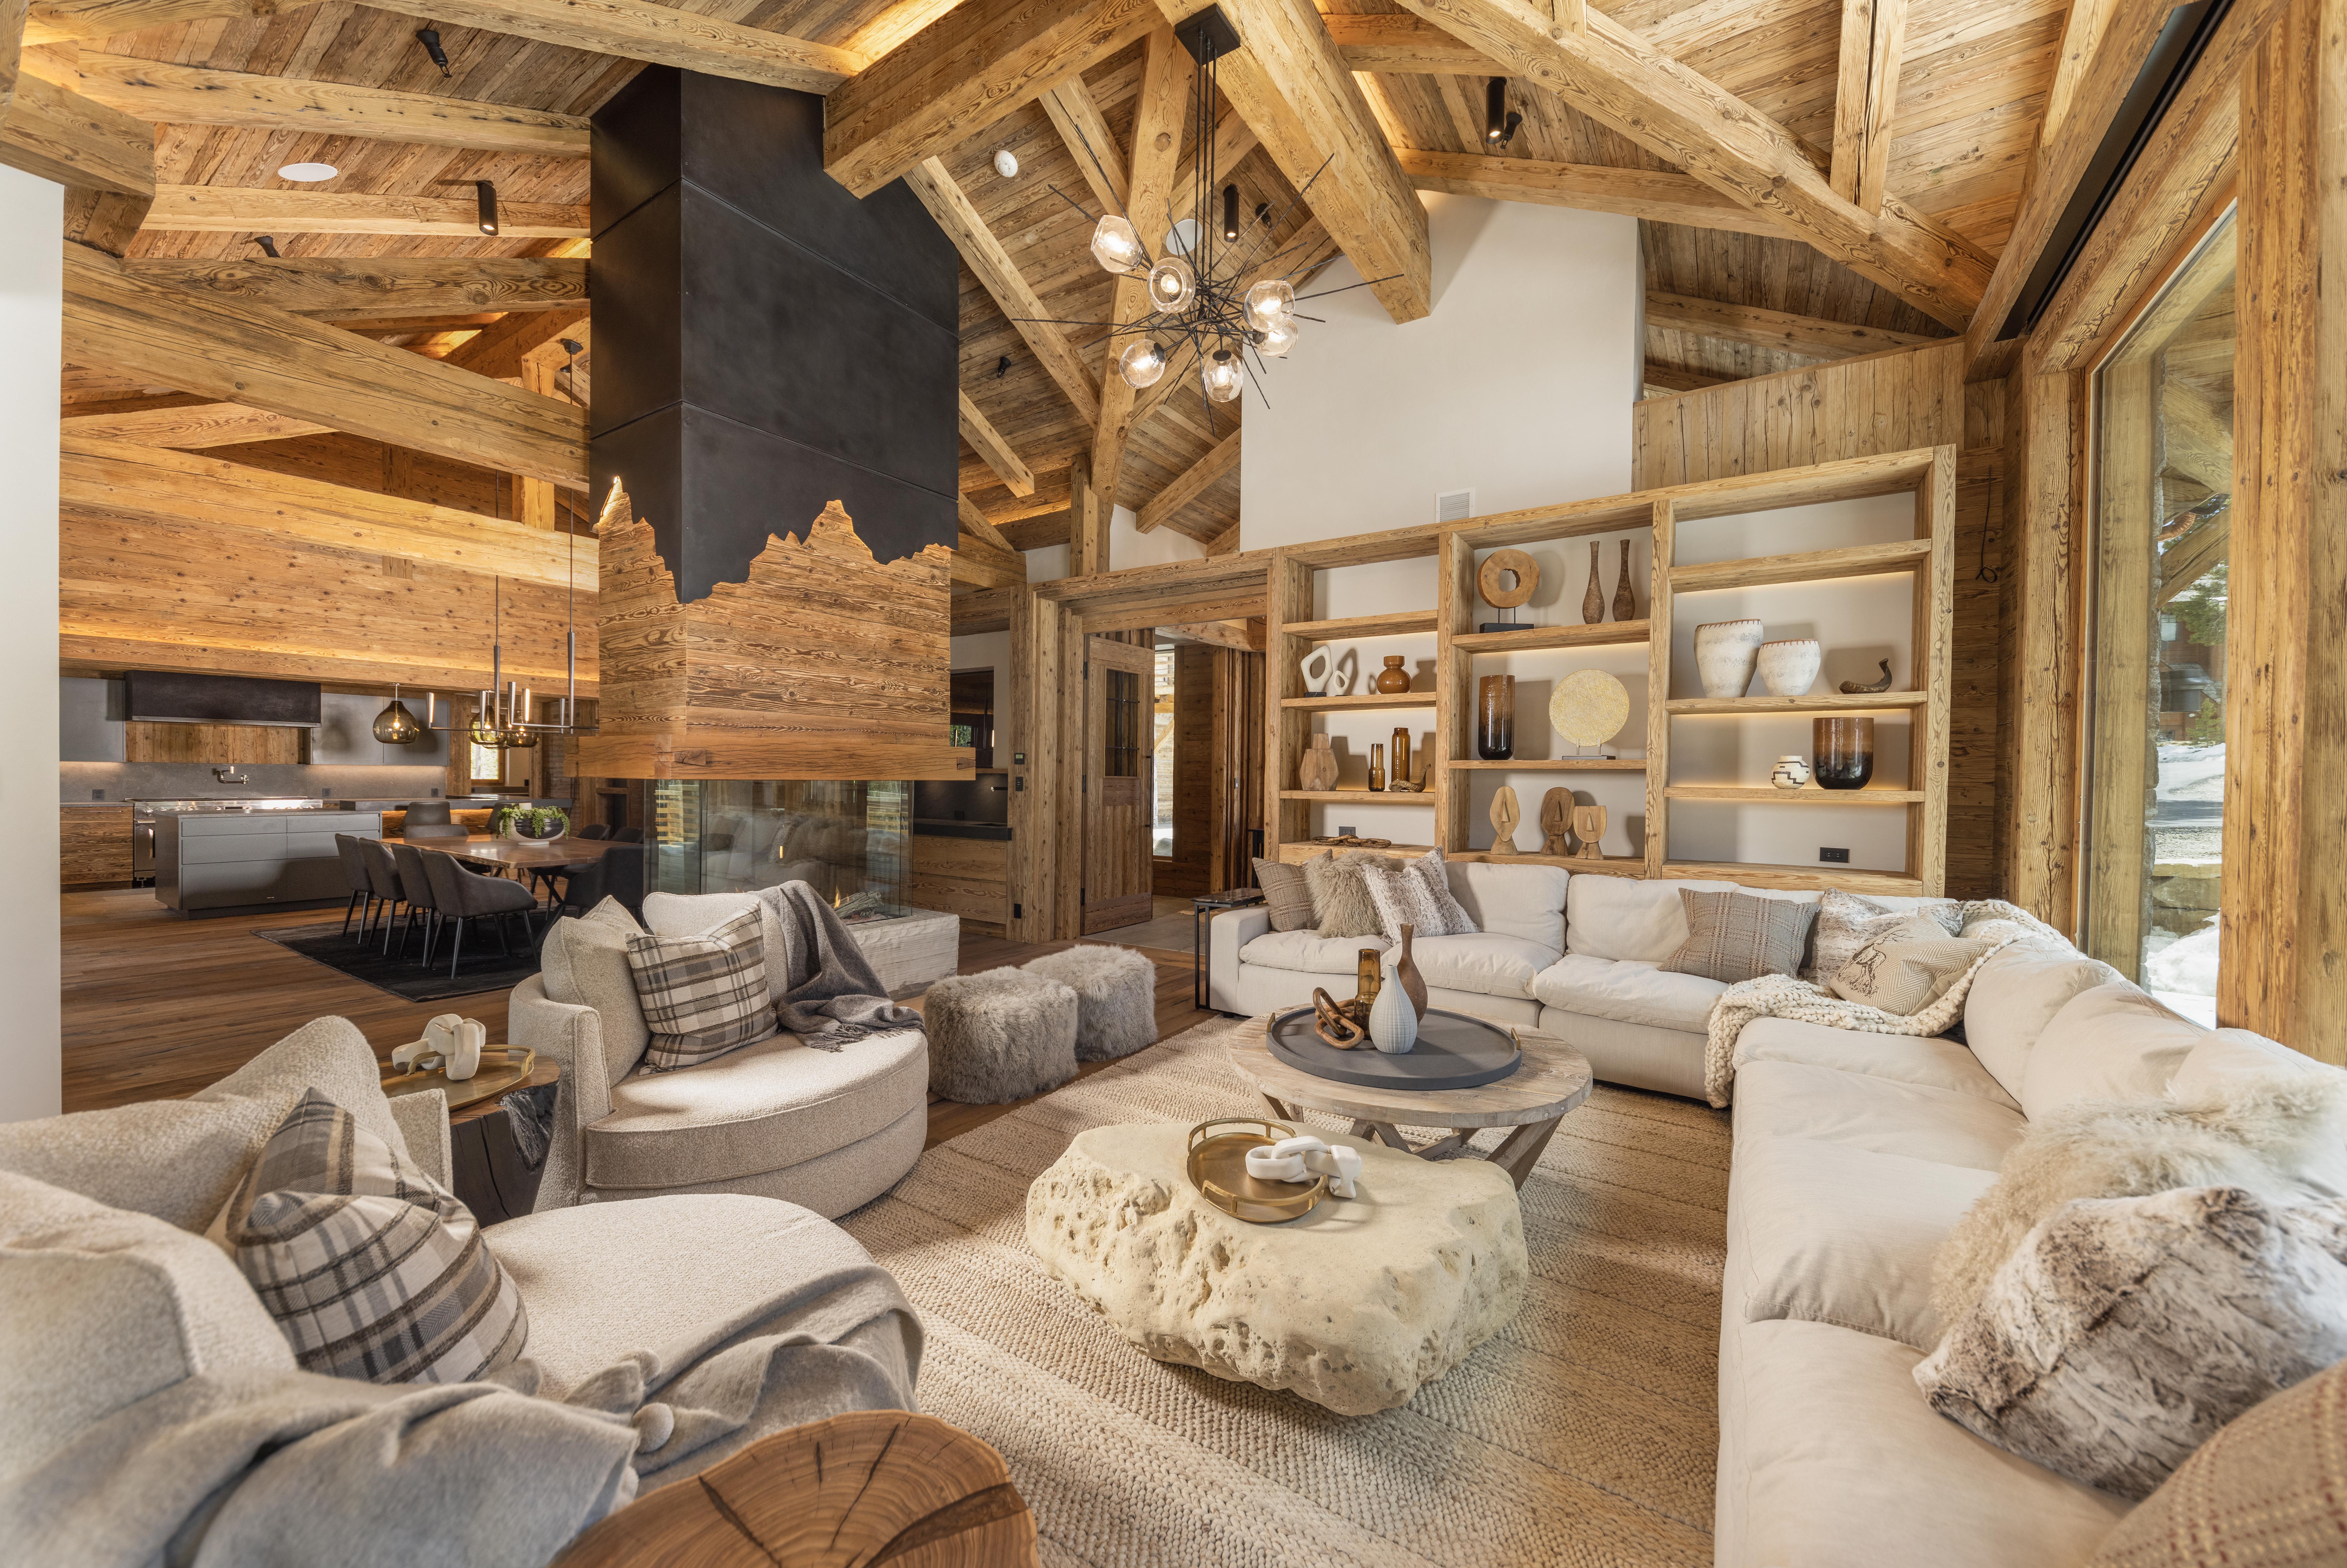 A rustic wood living room and kitchen centered around a fireplace.